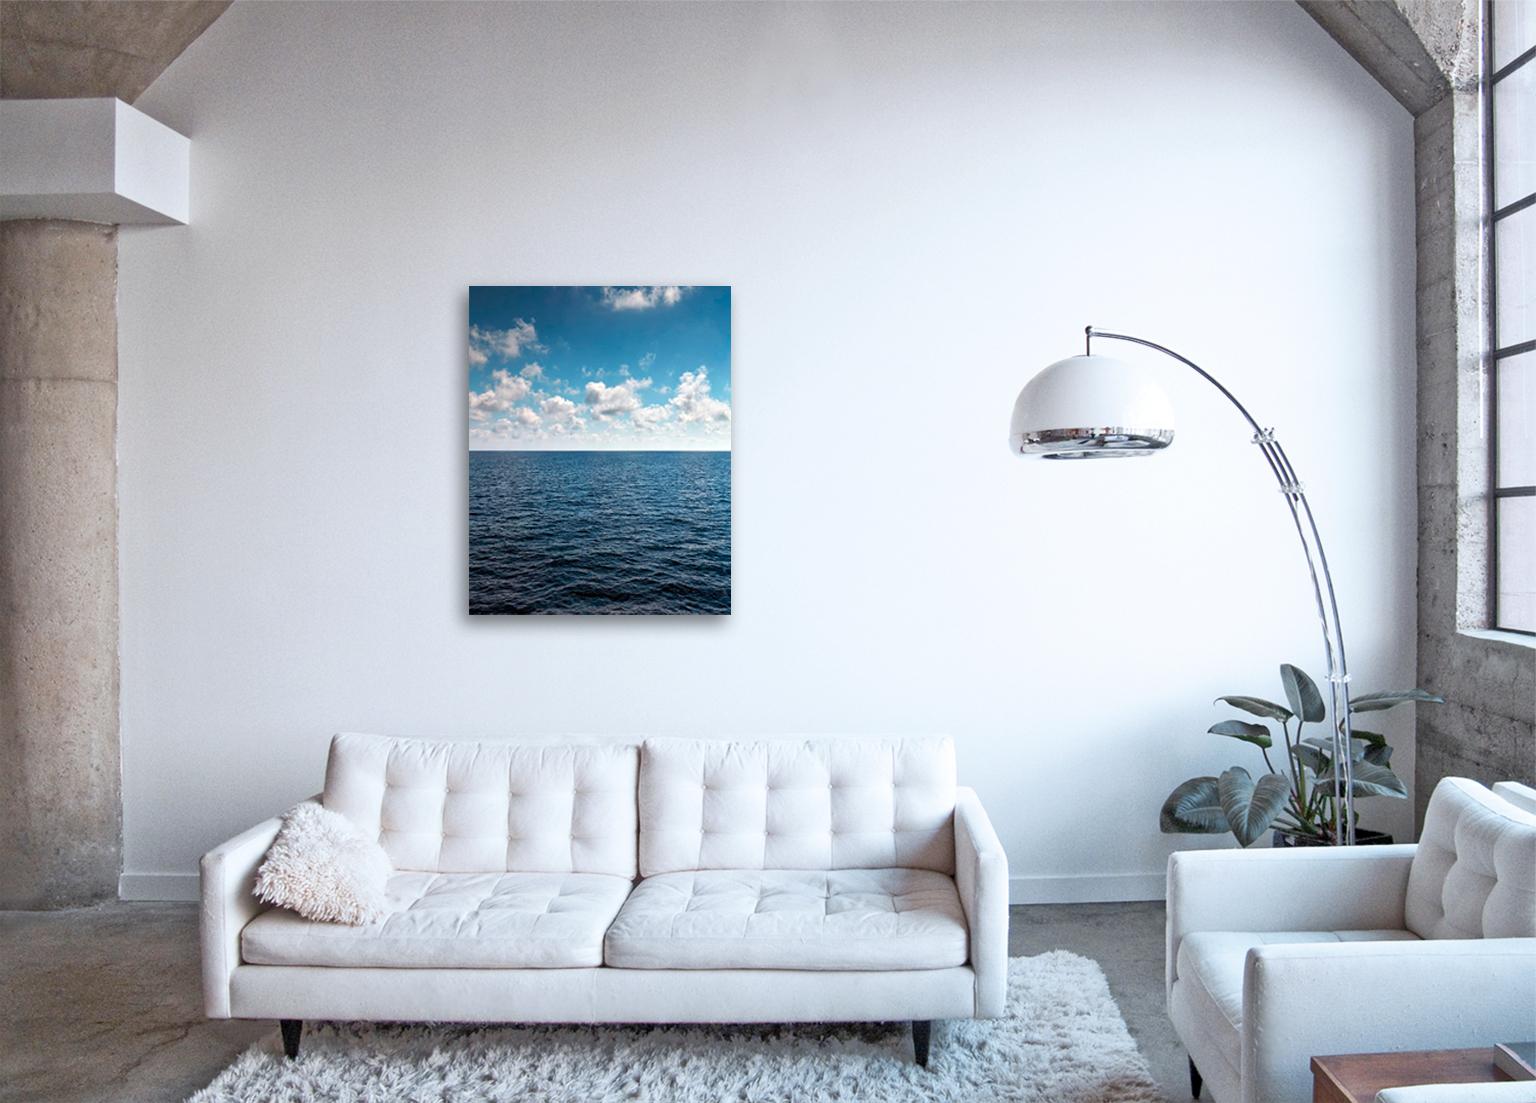 from a series of large scale photographs capturing a mesmerizing color palette of classic blue and sky tones 

SEASCAPE VI by Frank Schott

60 x 48 inches / 152cm x 122cm
signed edition of 7

72.5 x 58 inches / 184cm x 147cm 
signed edition of